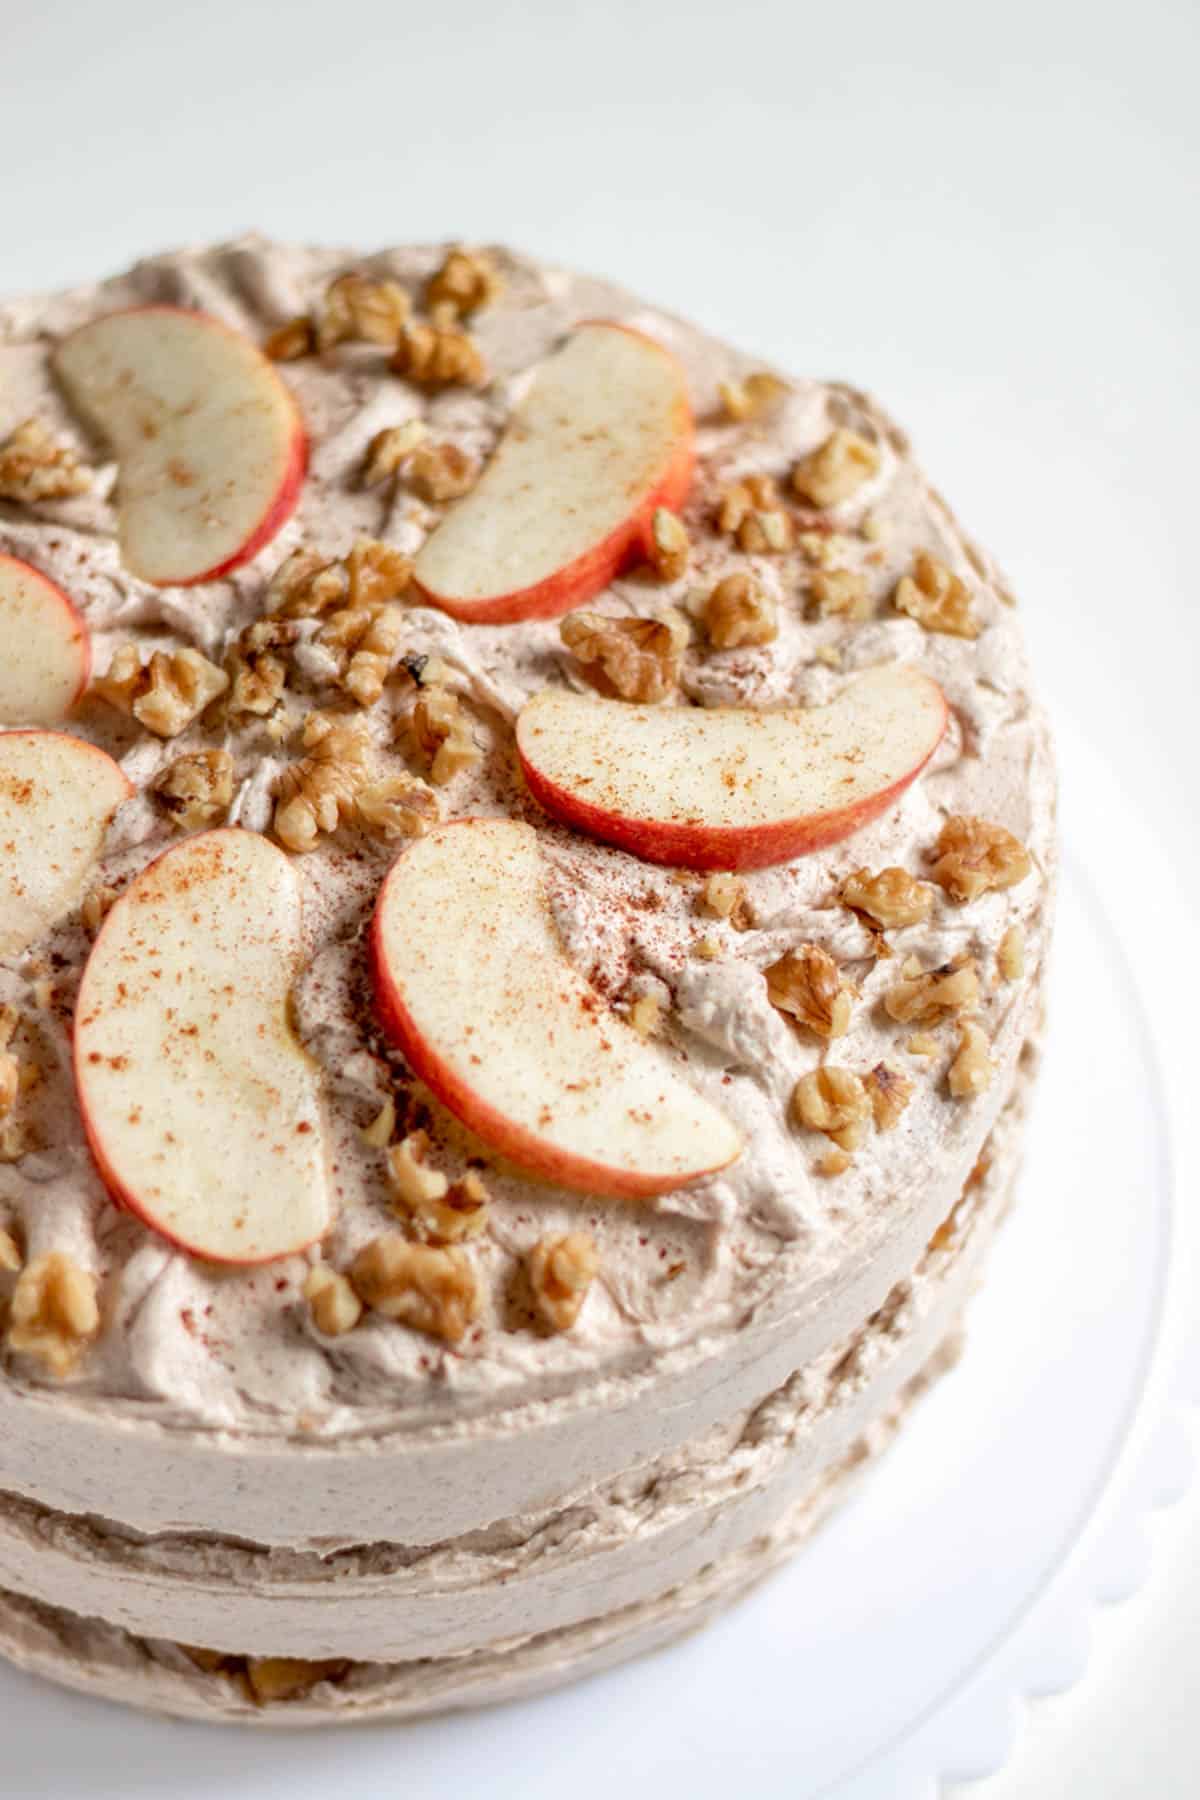 a view of the top of the decorated cake with apple slices and walnuts.